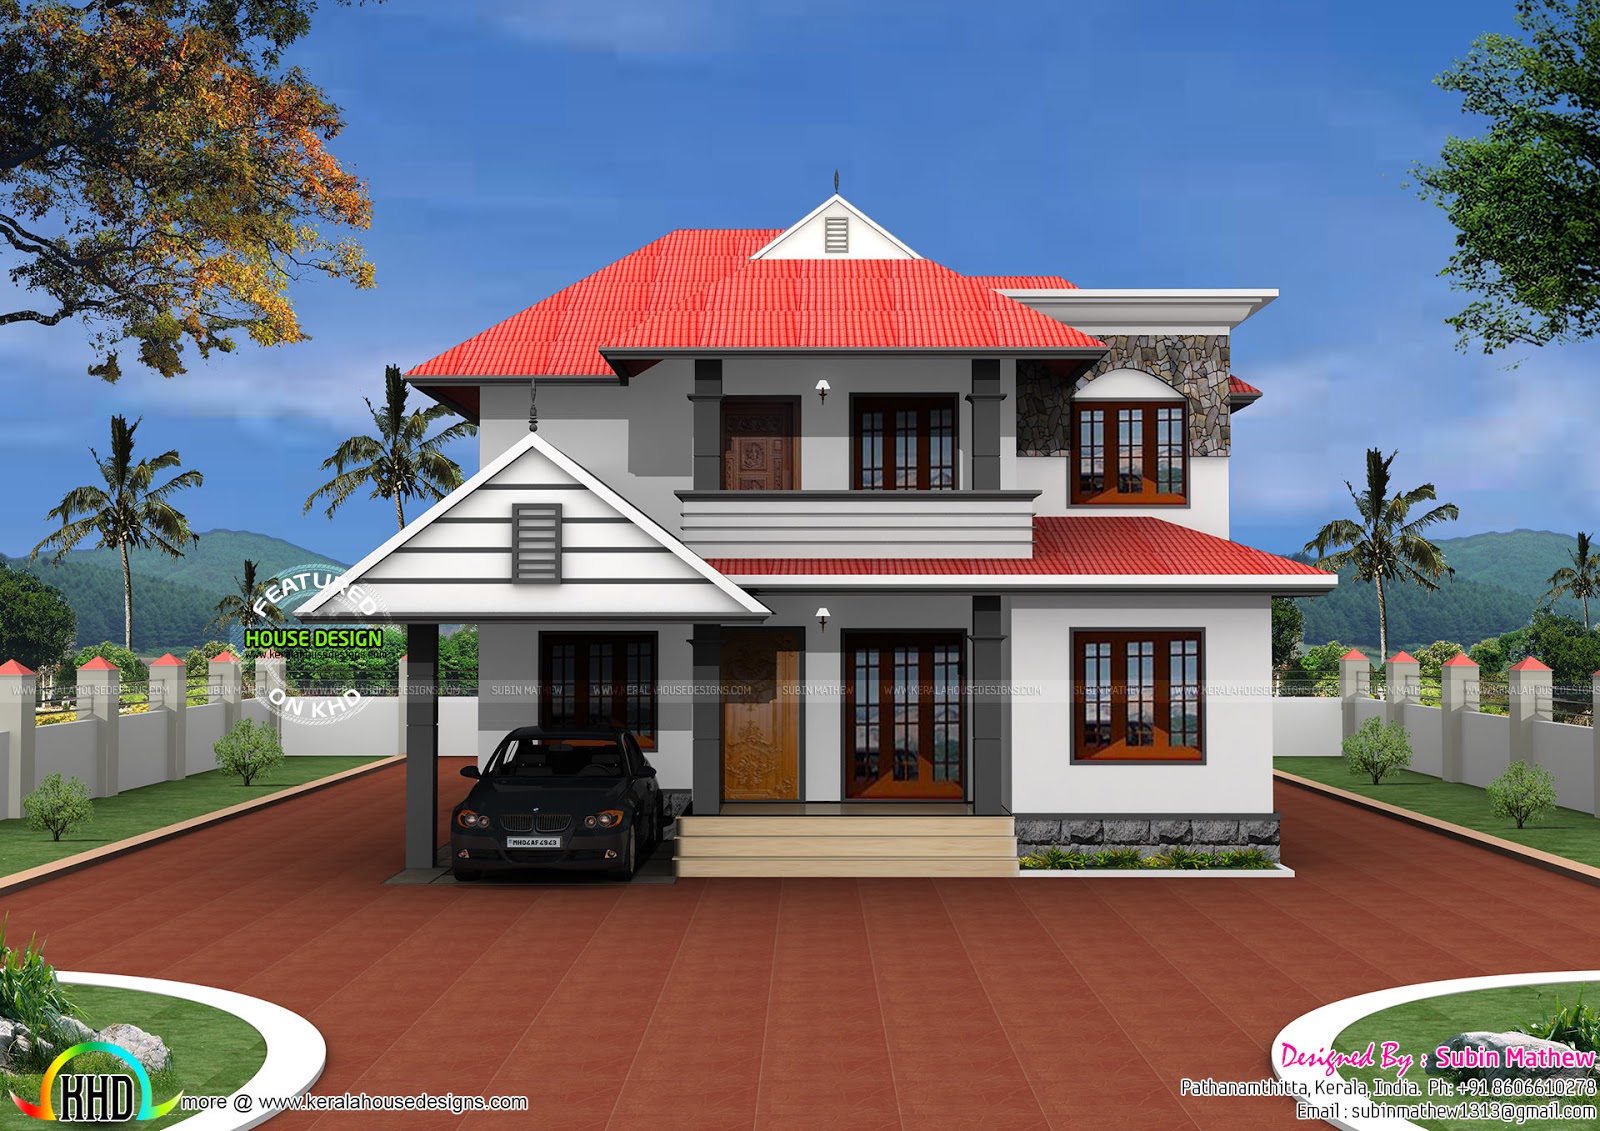 Typical Kerala  home  in 2500 sq  ft  Kerala  home  design and 